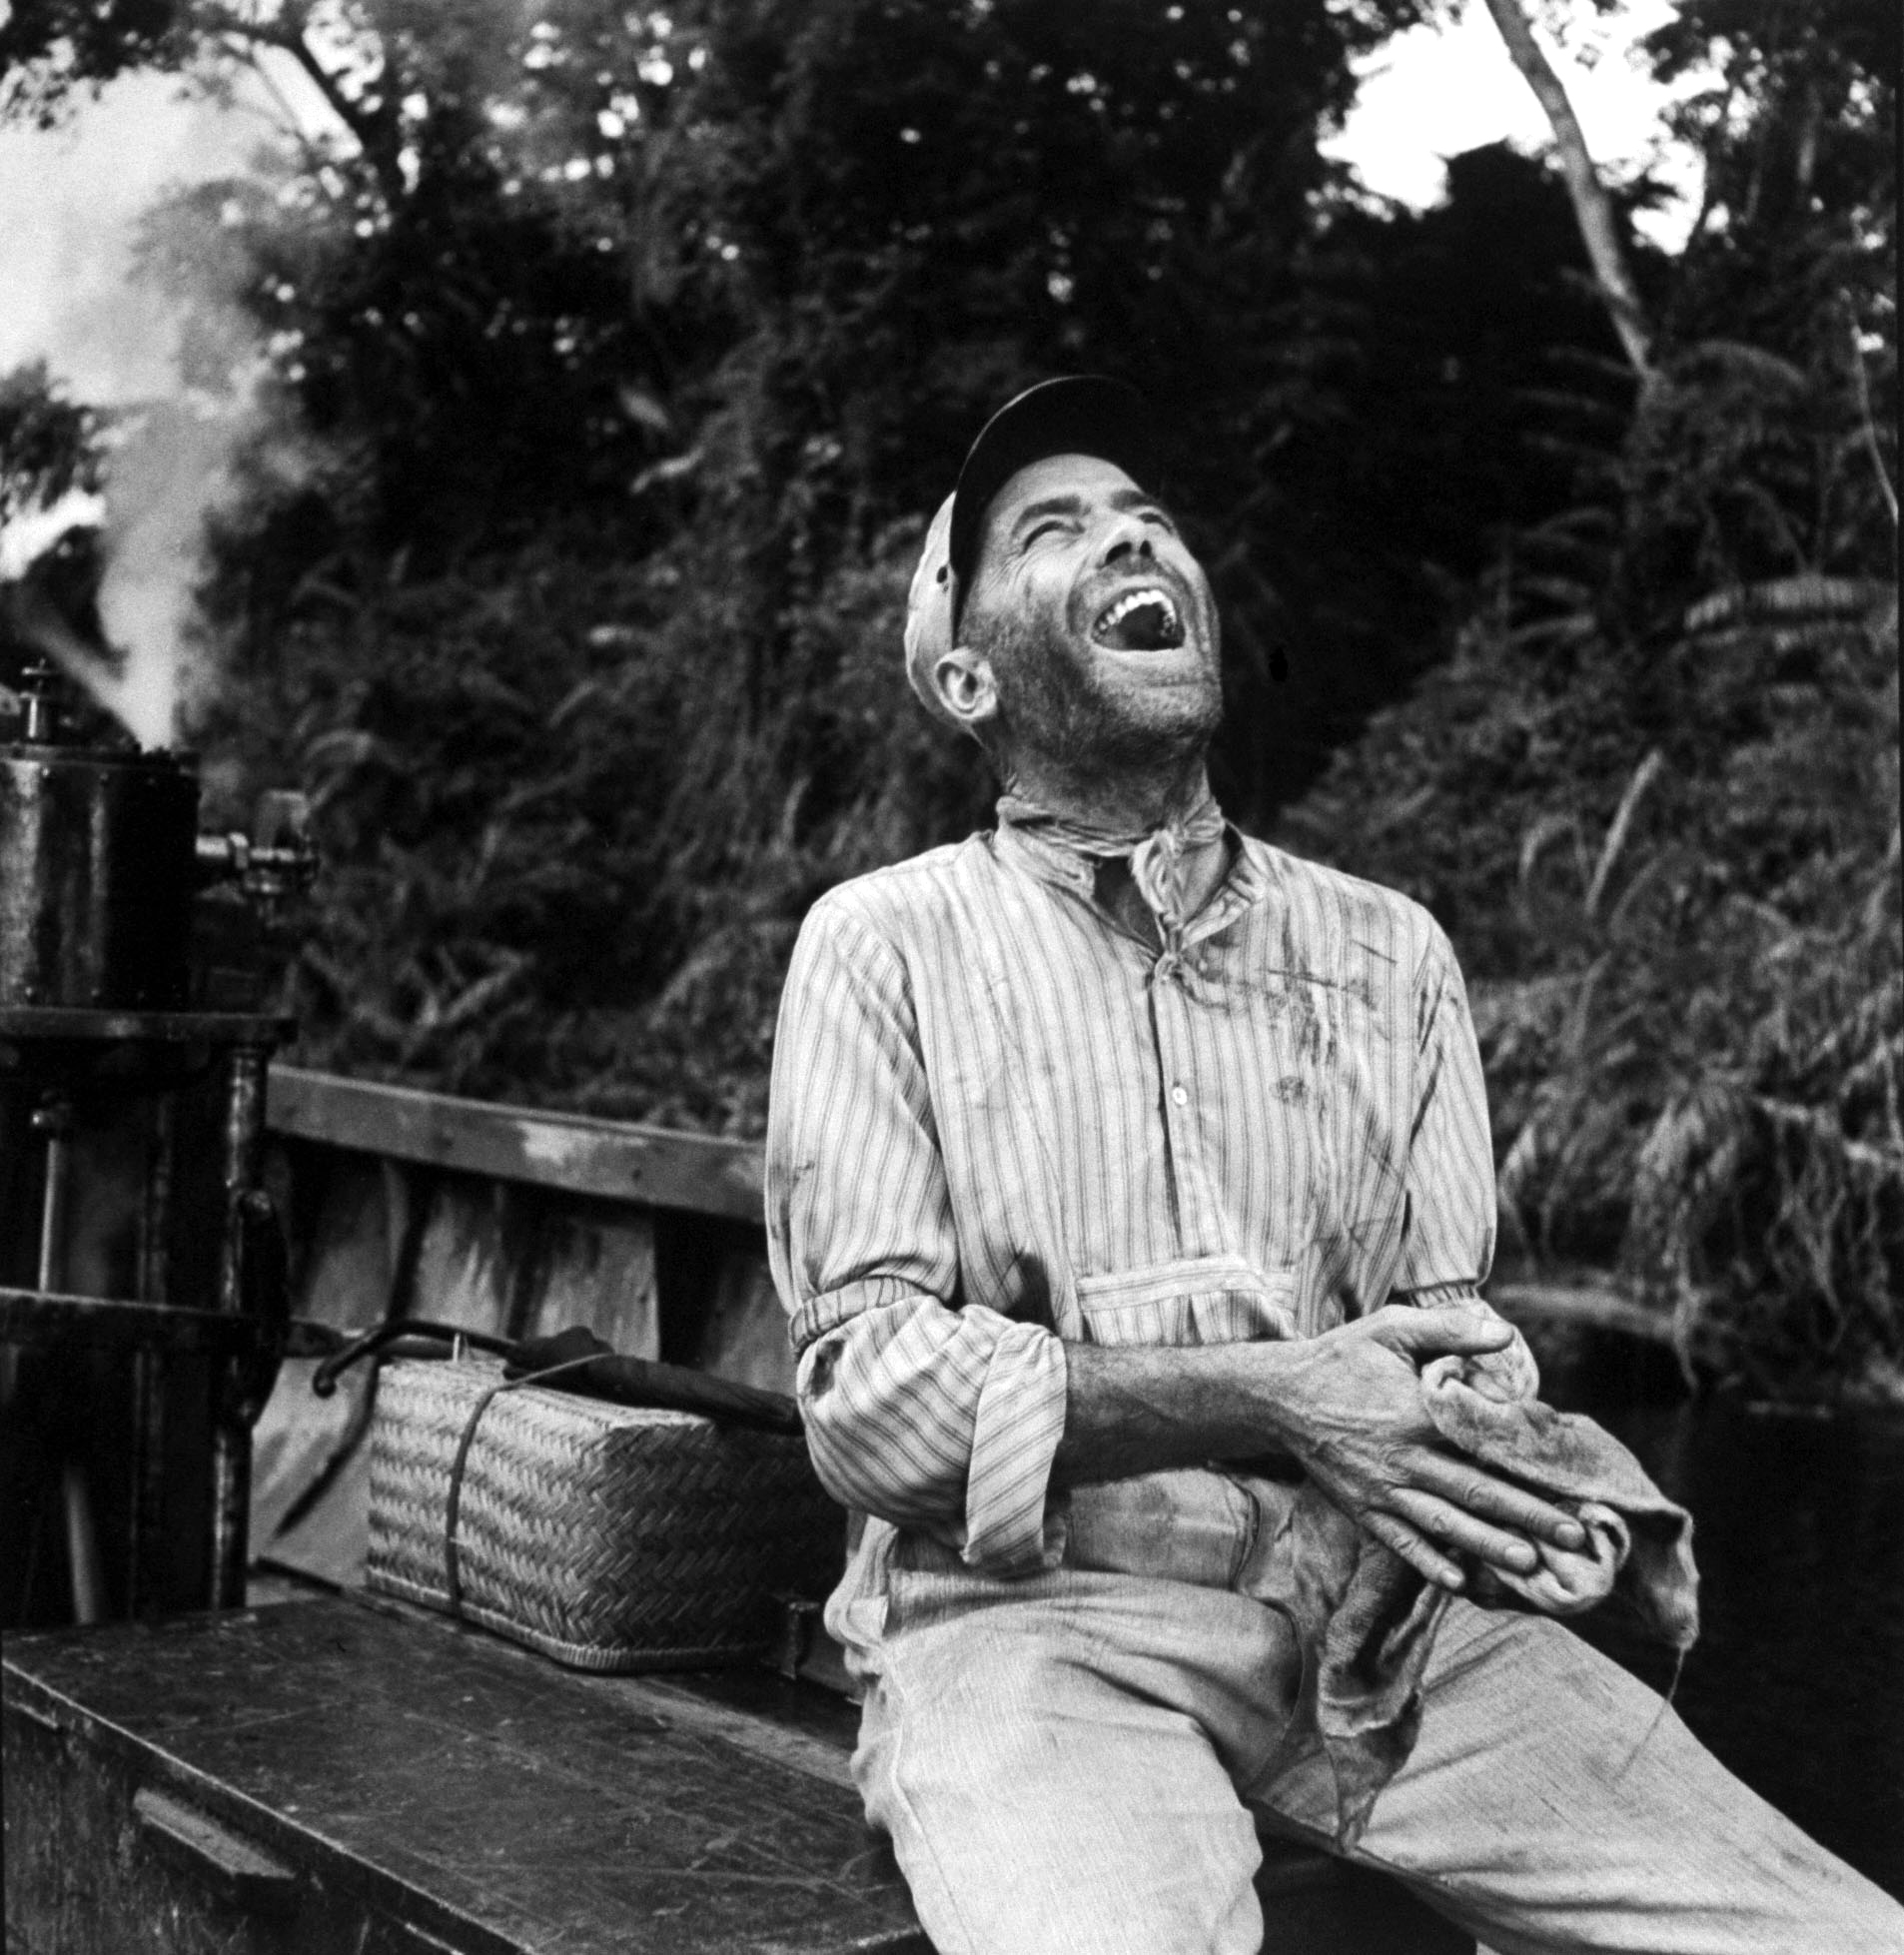 A deeply amused Humphrey Bogart on location in Africa for the filming of The African Queen.